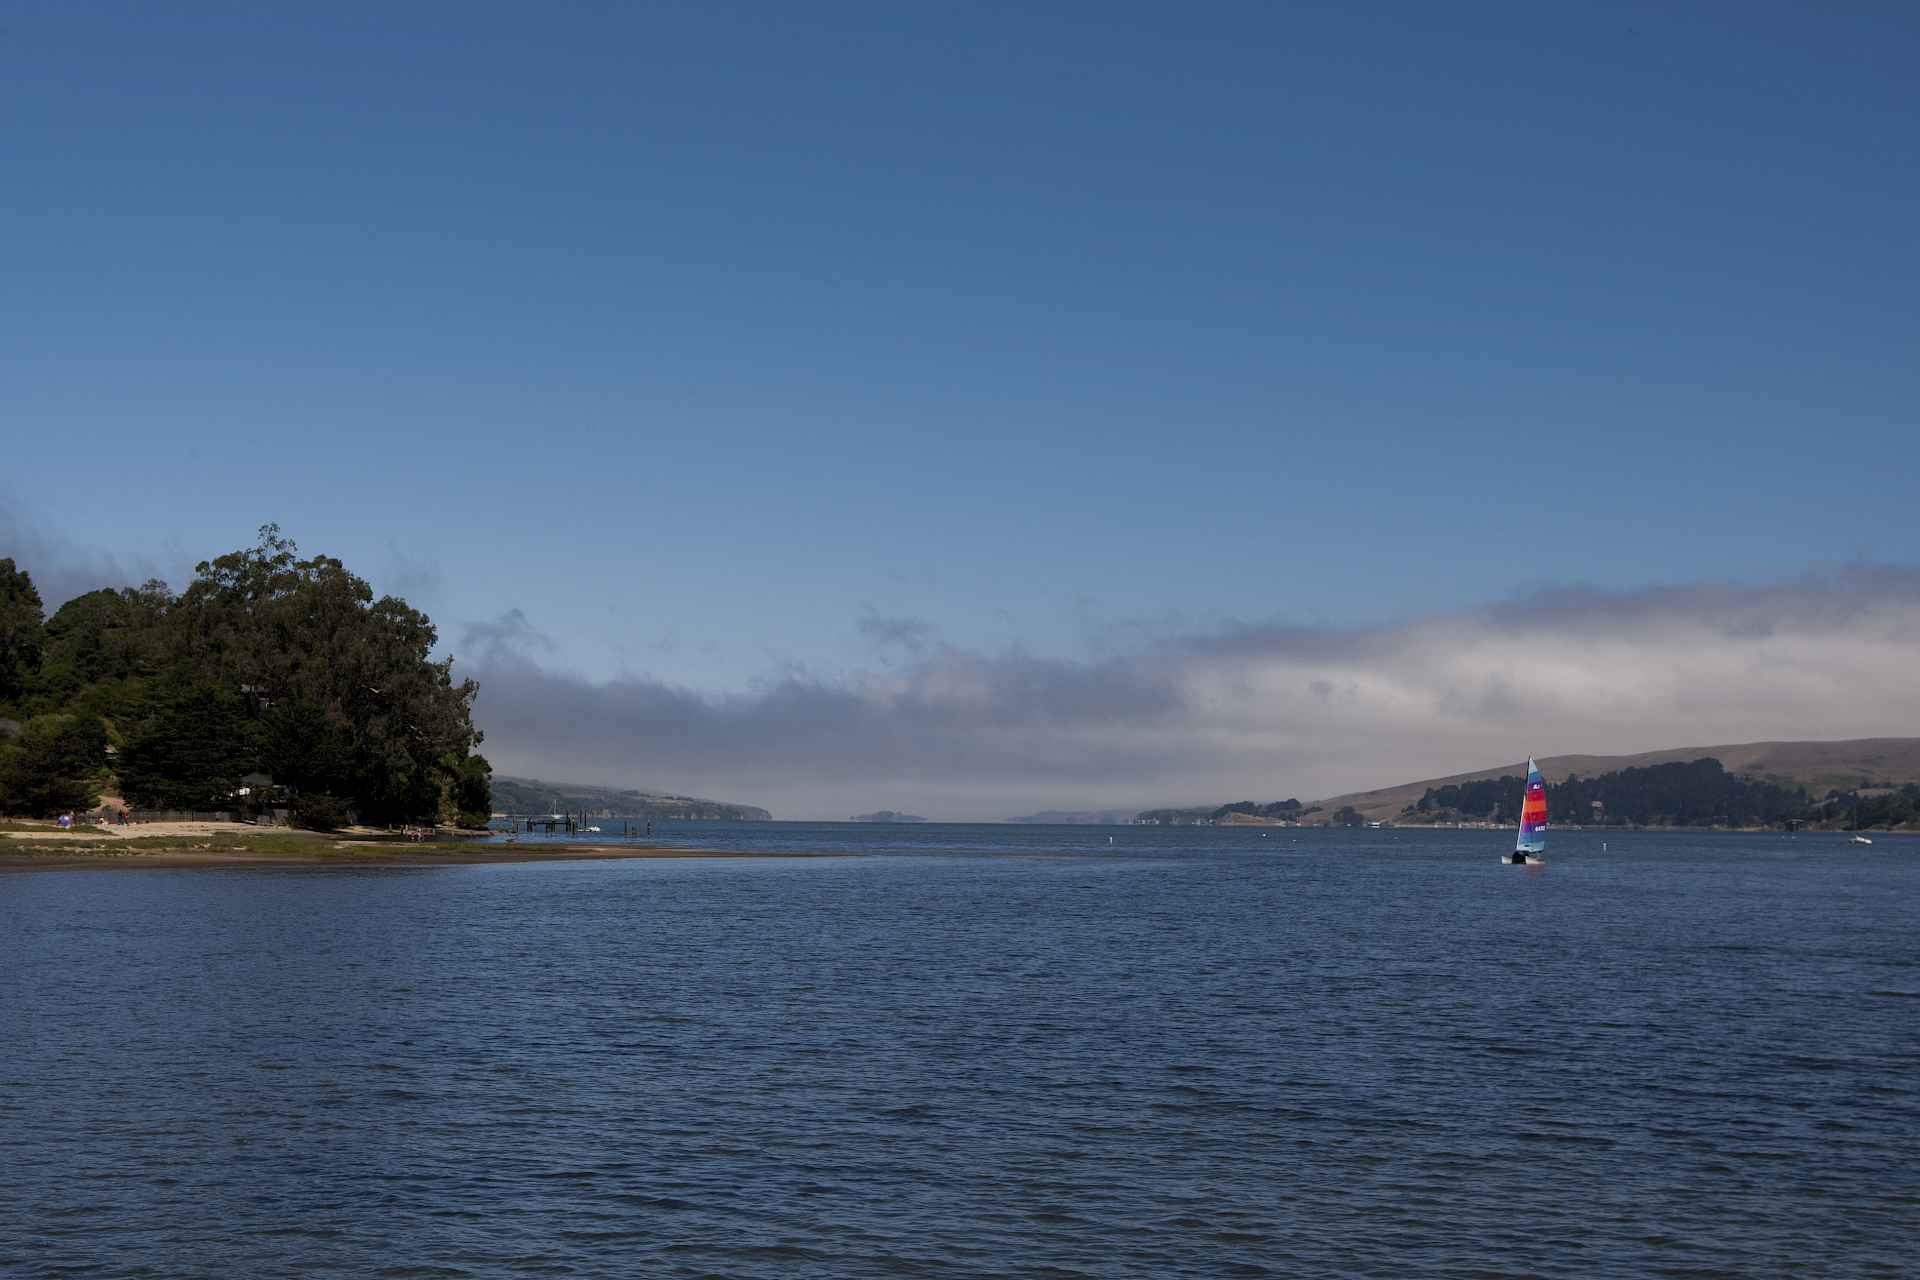 Captains Quarters - Lodging Options - Tomales Bay Resort 2024